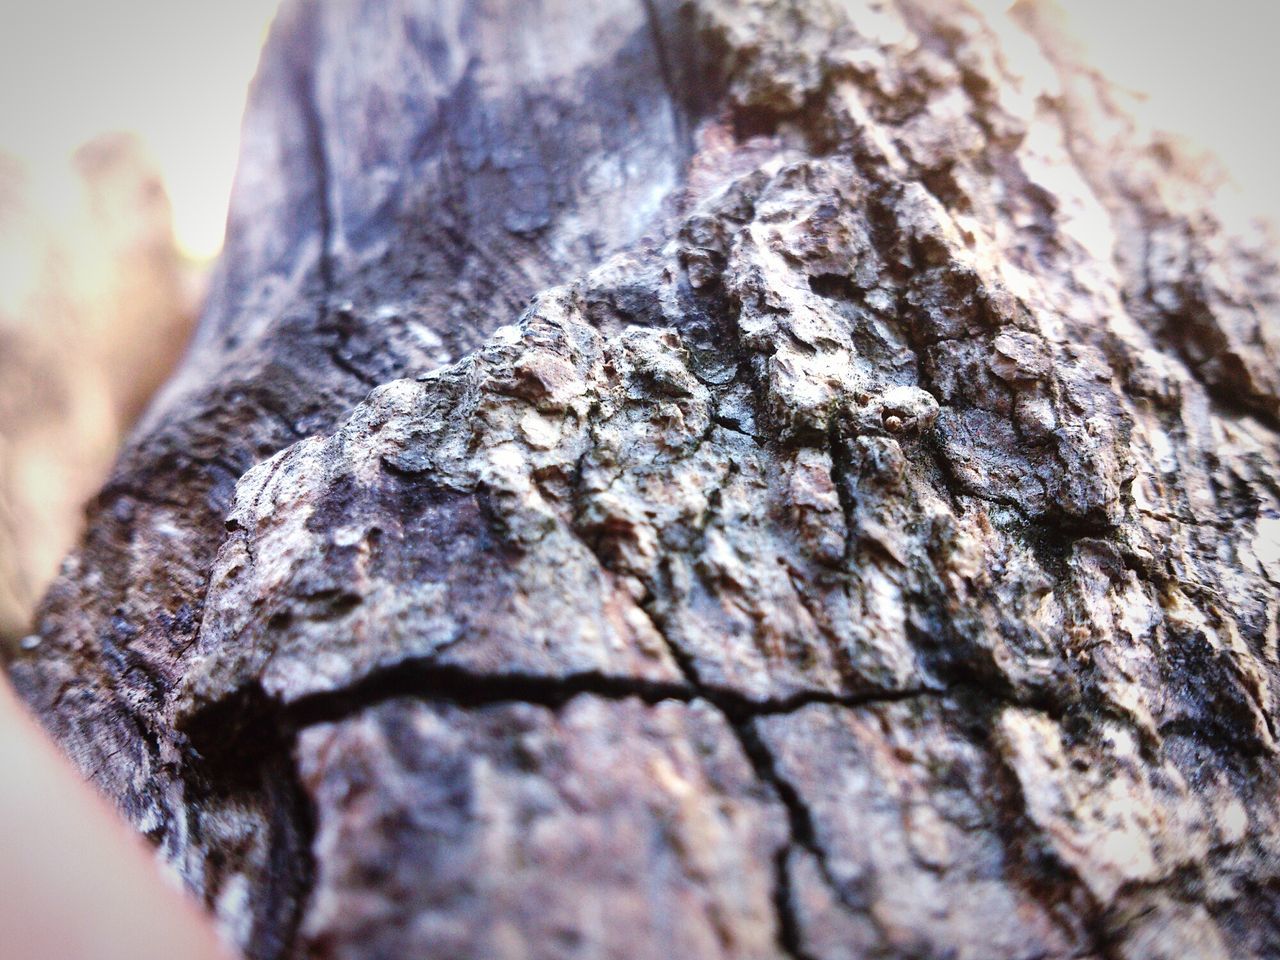 textured, rough, tree trunk, close-up, bark, nature, natural pattern, tree, selective focus, focus on foreground, brown, plant bark, growth, detail, day, moss, outdoors, pattern, rock - object, no people